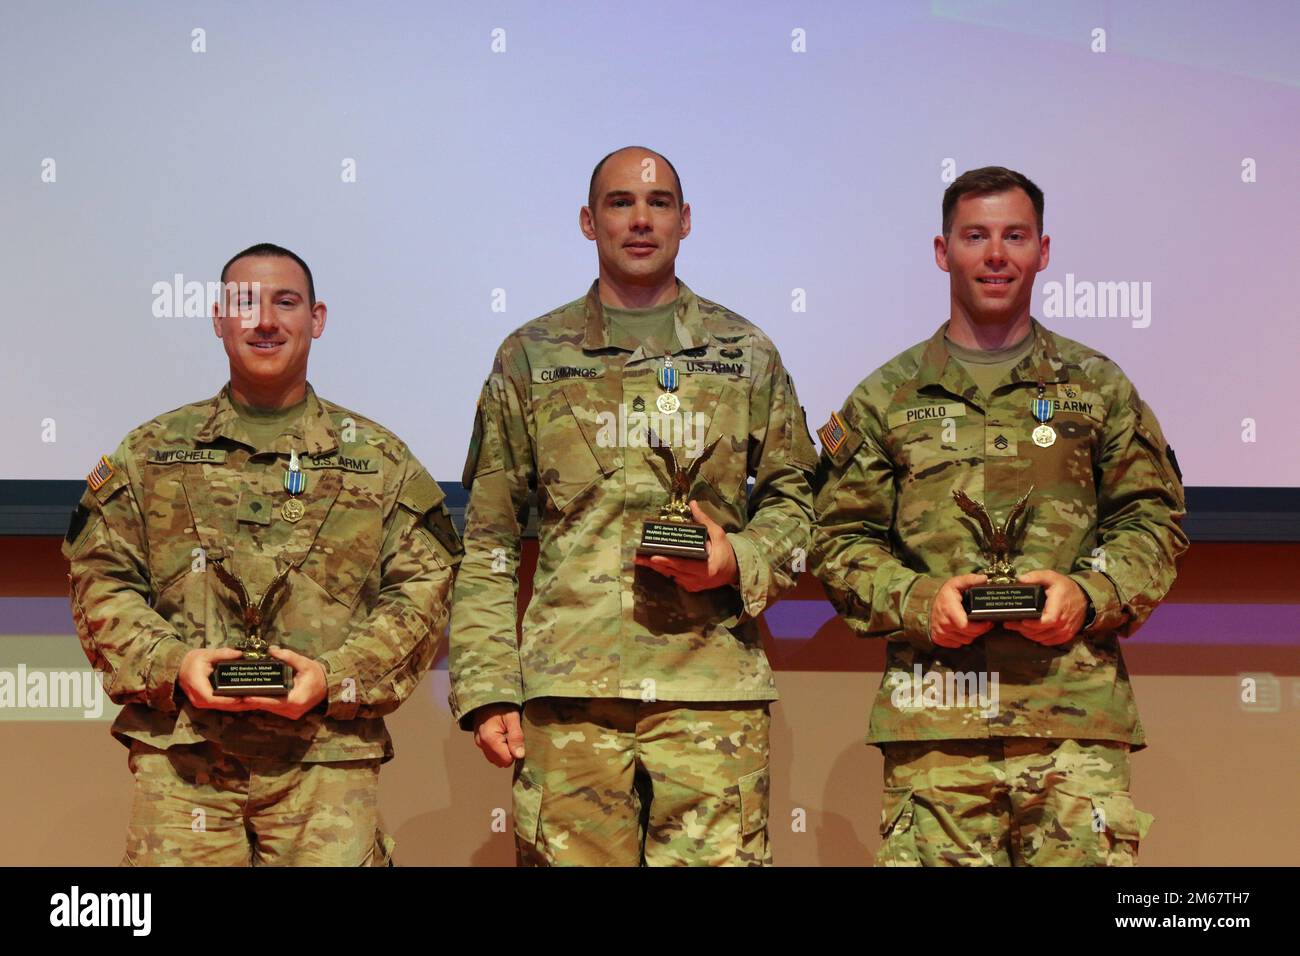 (Left to right) Spc. Brandon Mitchell, with the 337th Engineer Battalion, 55th Maneuver Enhancement Brigade, won the best Soldier portion of the 2022 Best Warrior Competition; Sgt. 1st Class James Cummings, with the 166th Regional Training Institute, won the Command Sgt. Maj. Jay H. Fields award; and Staff Sgt. Jesse Picklo, with the 1-109th Infantry Regiment, 2nd Infantry Combat Brigade, won the best noncommissioned officer portion of the competition. Fifteen enlisted Pennsylvania Army National Guard competed in the Best Warrior Competition April 11-14 at Fort Indiantown Gap, Pa. Stock Photo